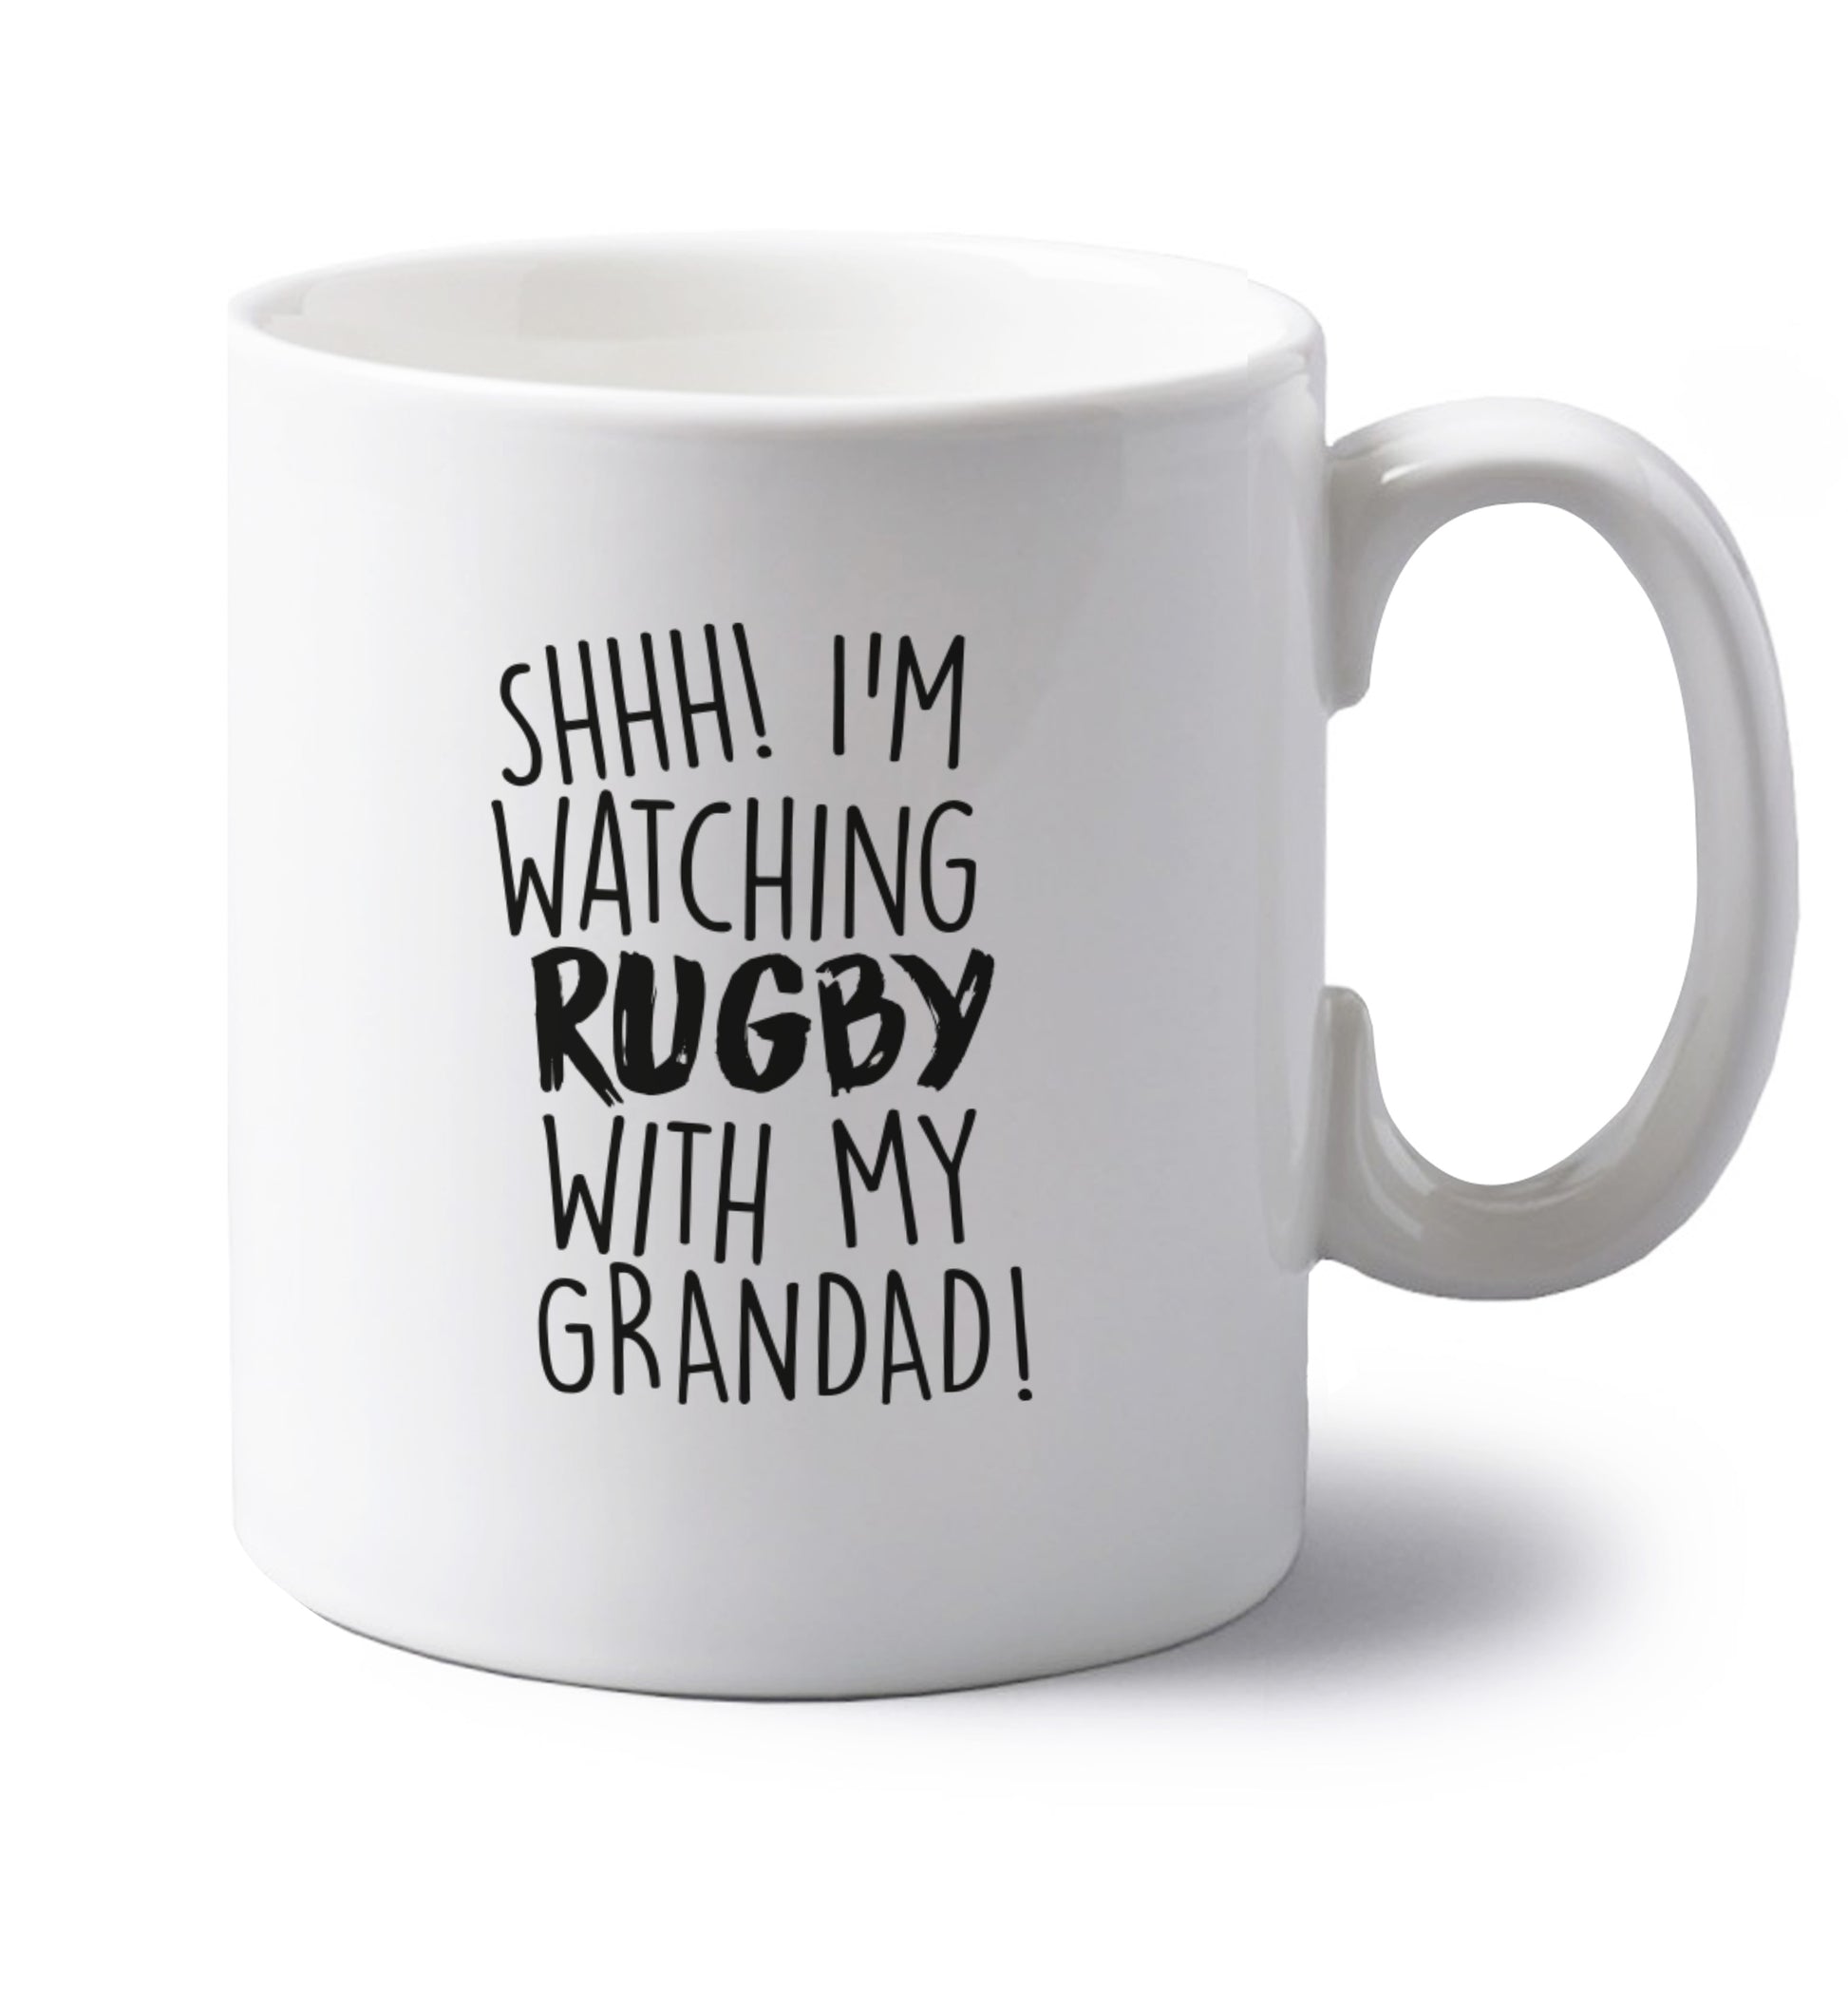 Shh I'm watching rugby with my grandaughter left handed white ceramic mug 